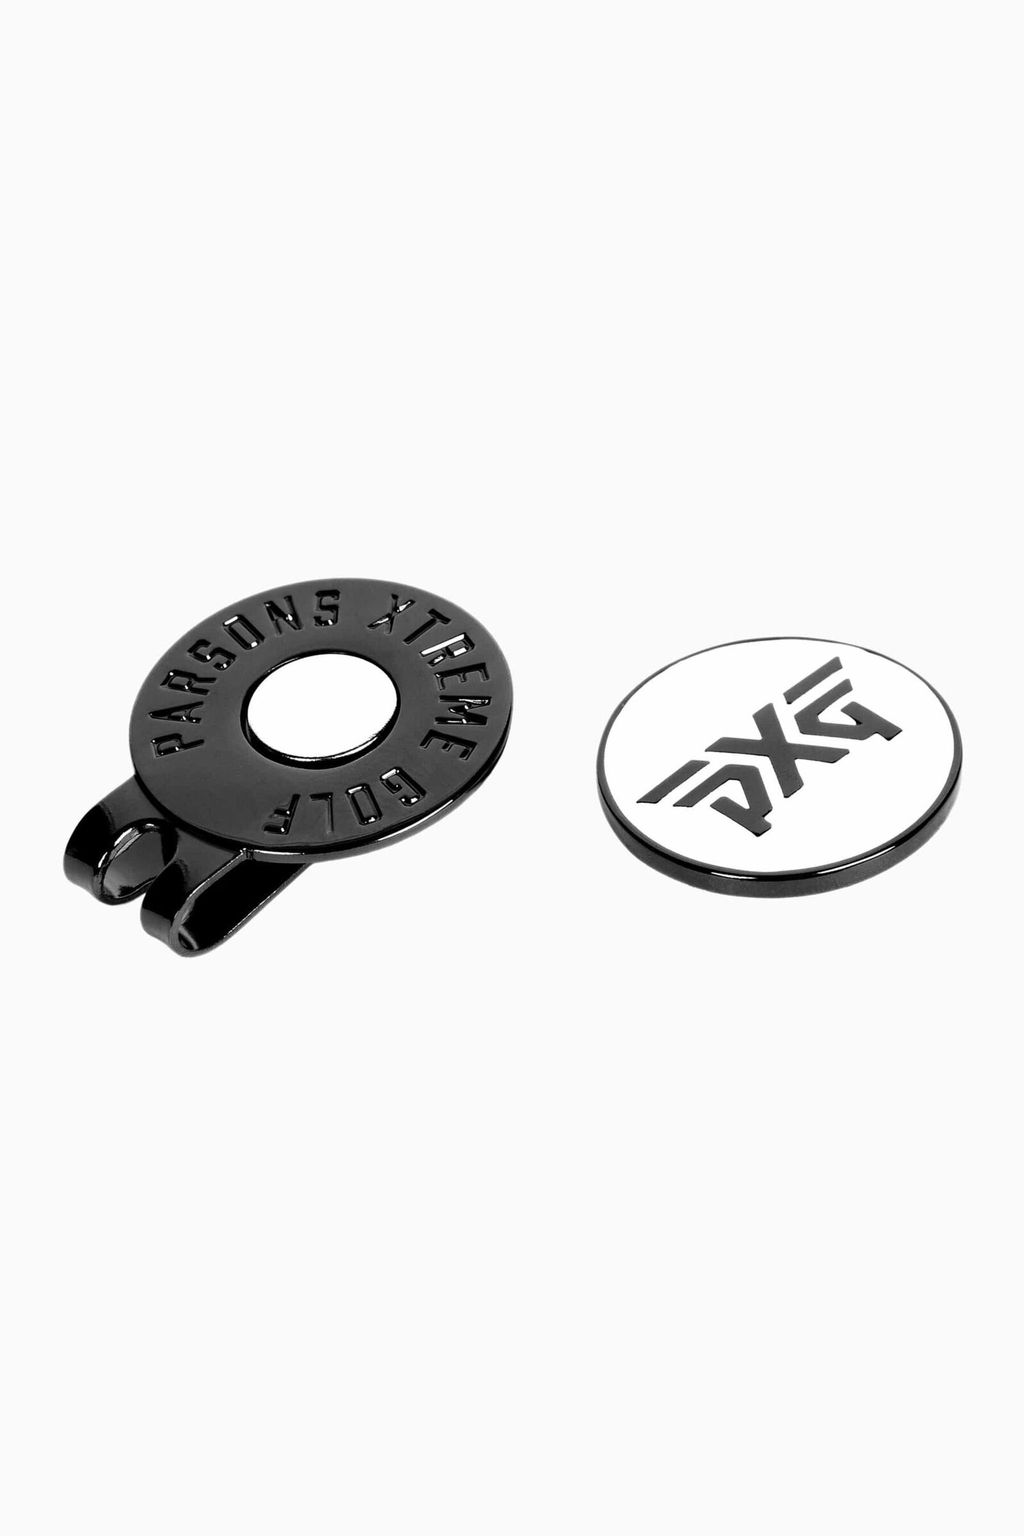 PXG-Magnetic-Ball-Marker-and-Cap-Clip-Black-Listing-2-HiRes-50